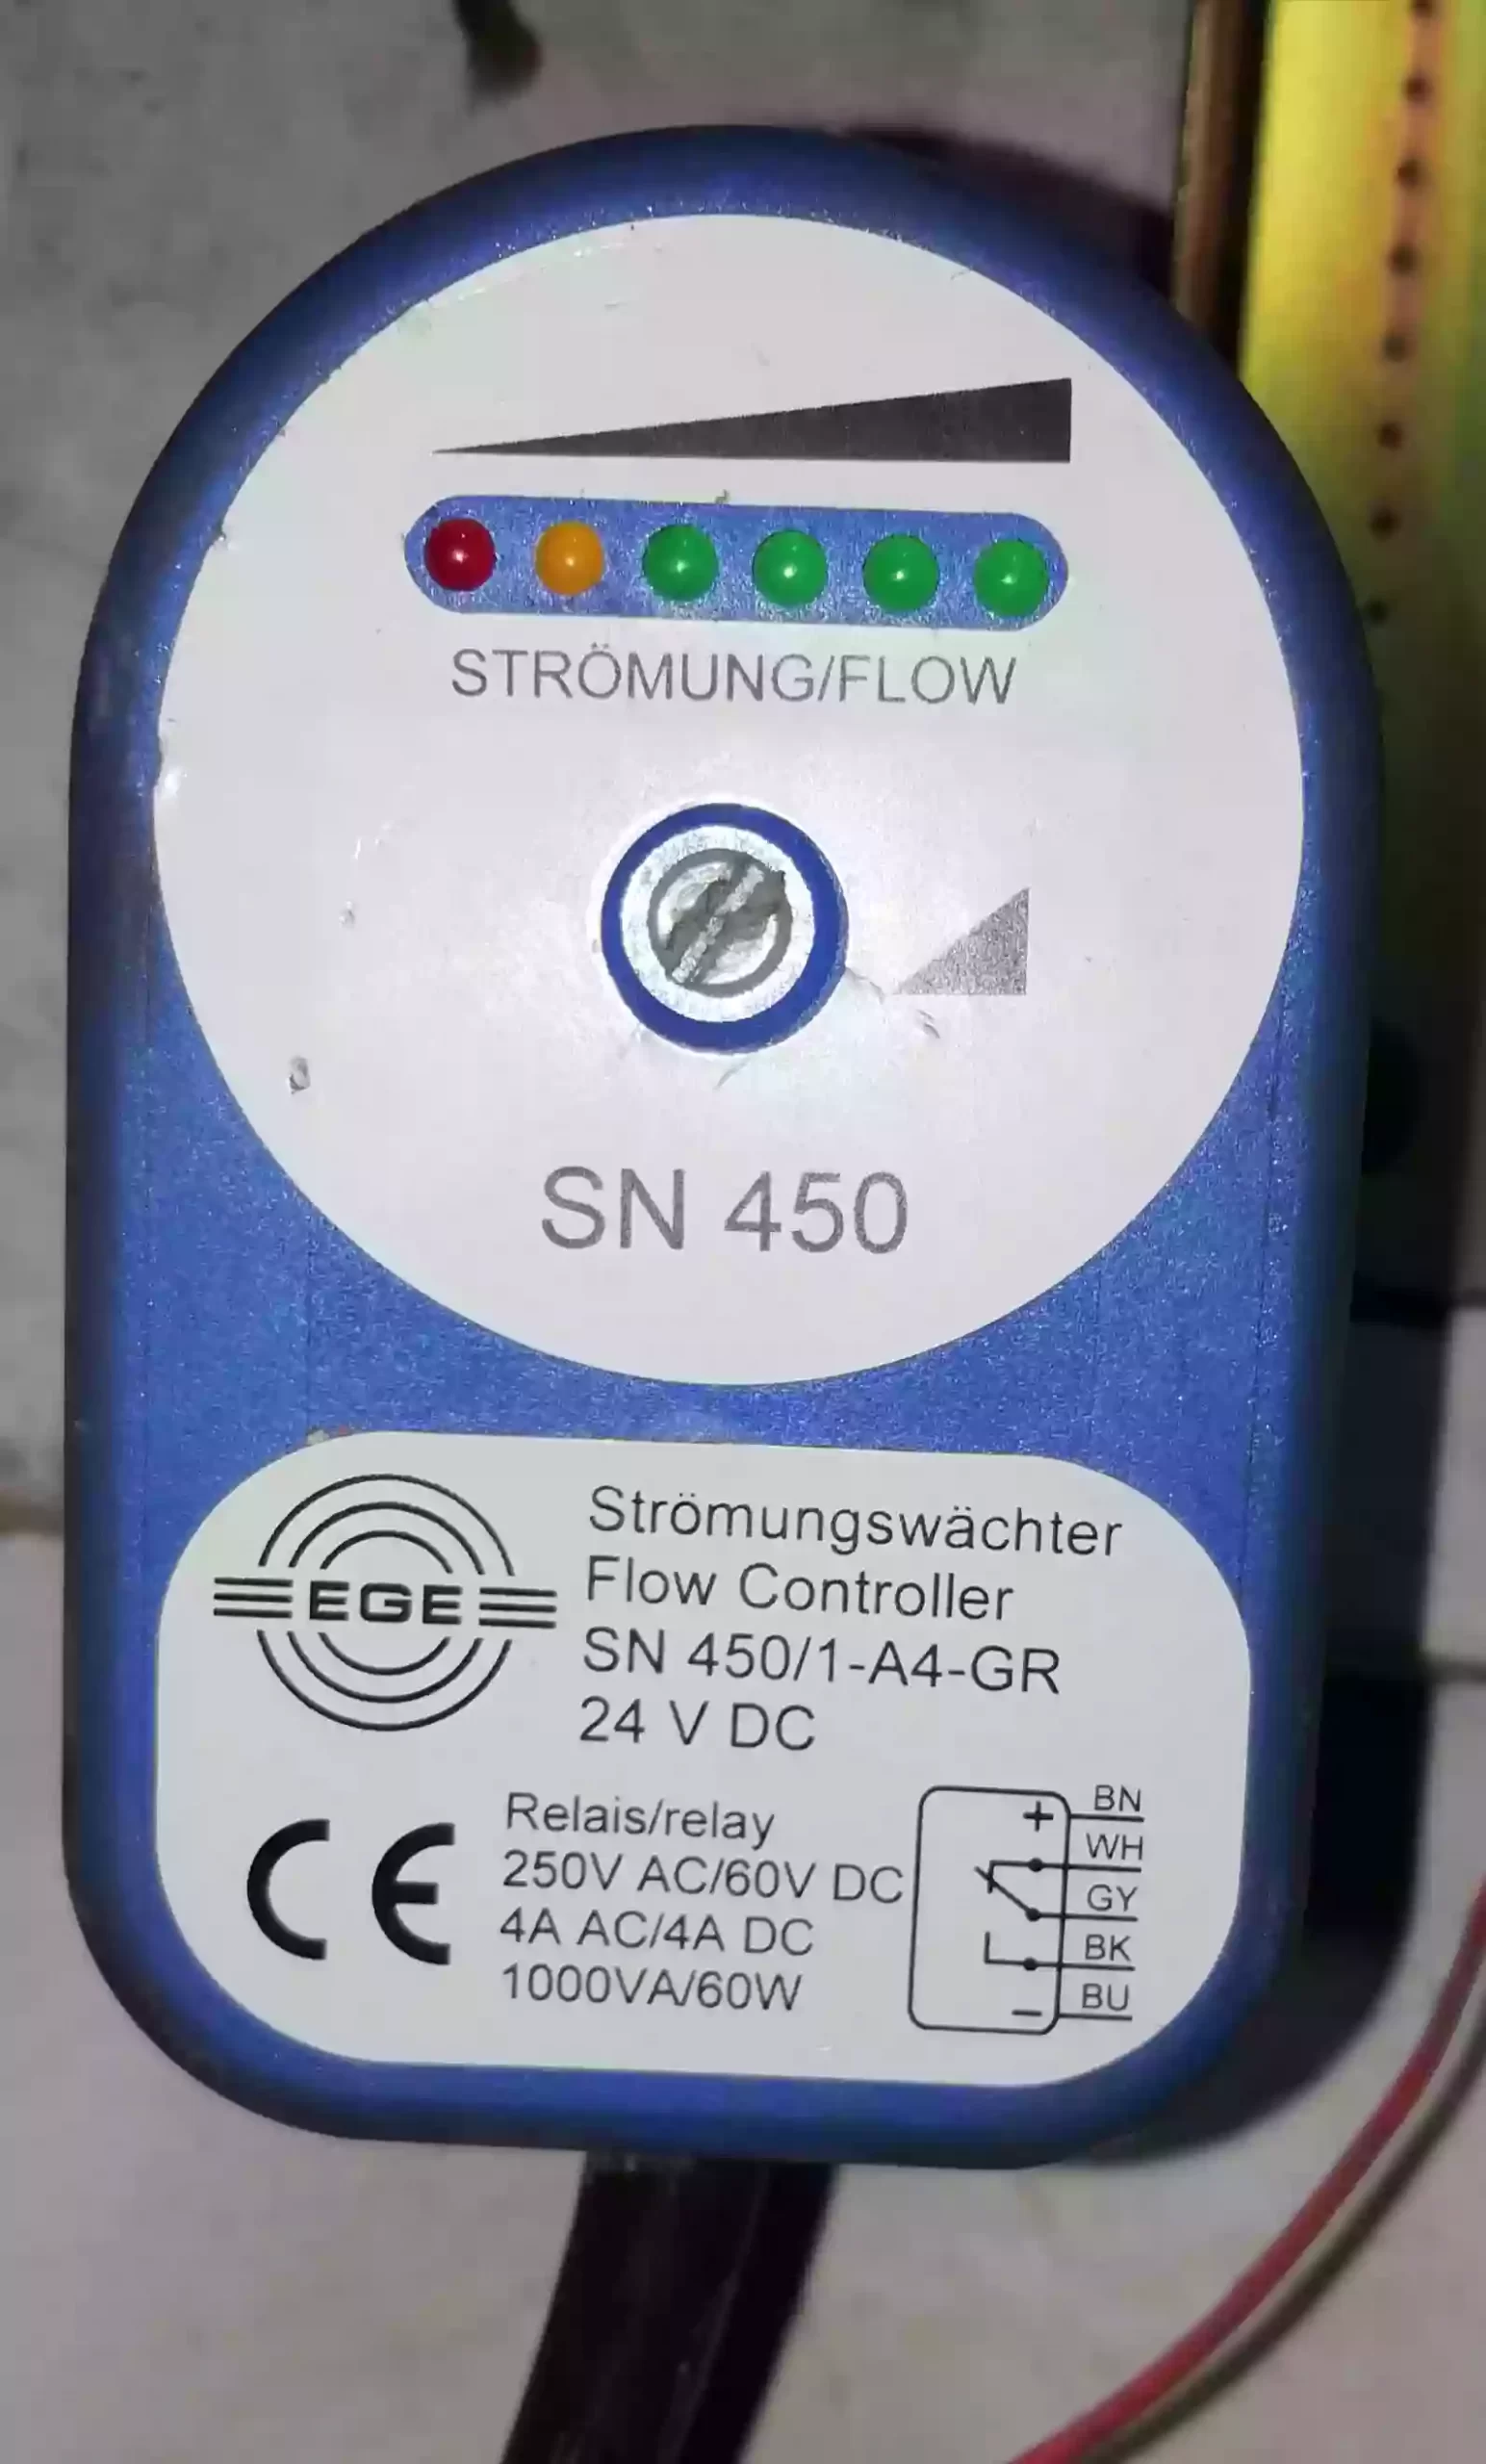 SN 450/1-A4-GR Flow Controller Stromungswachter. Best Price With Pride Bangladesh